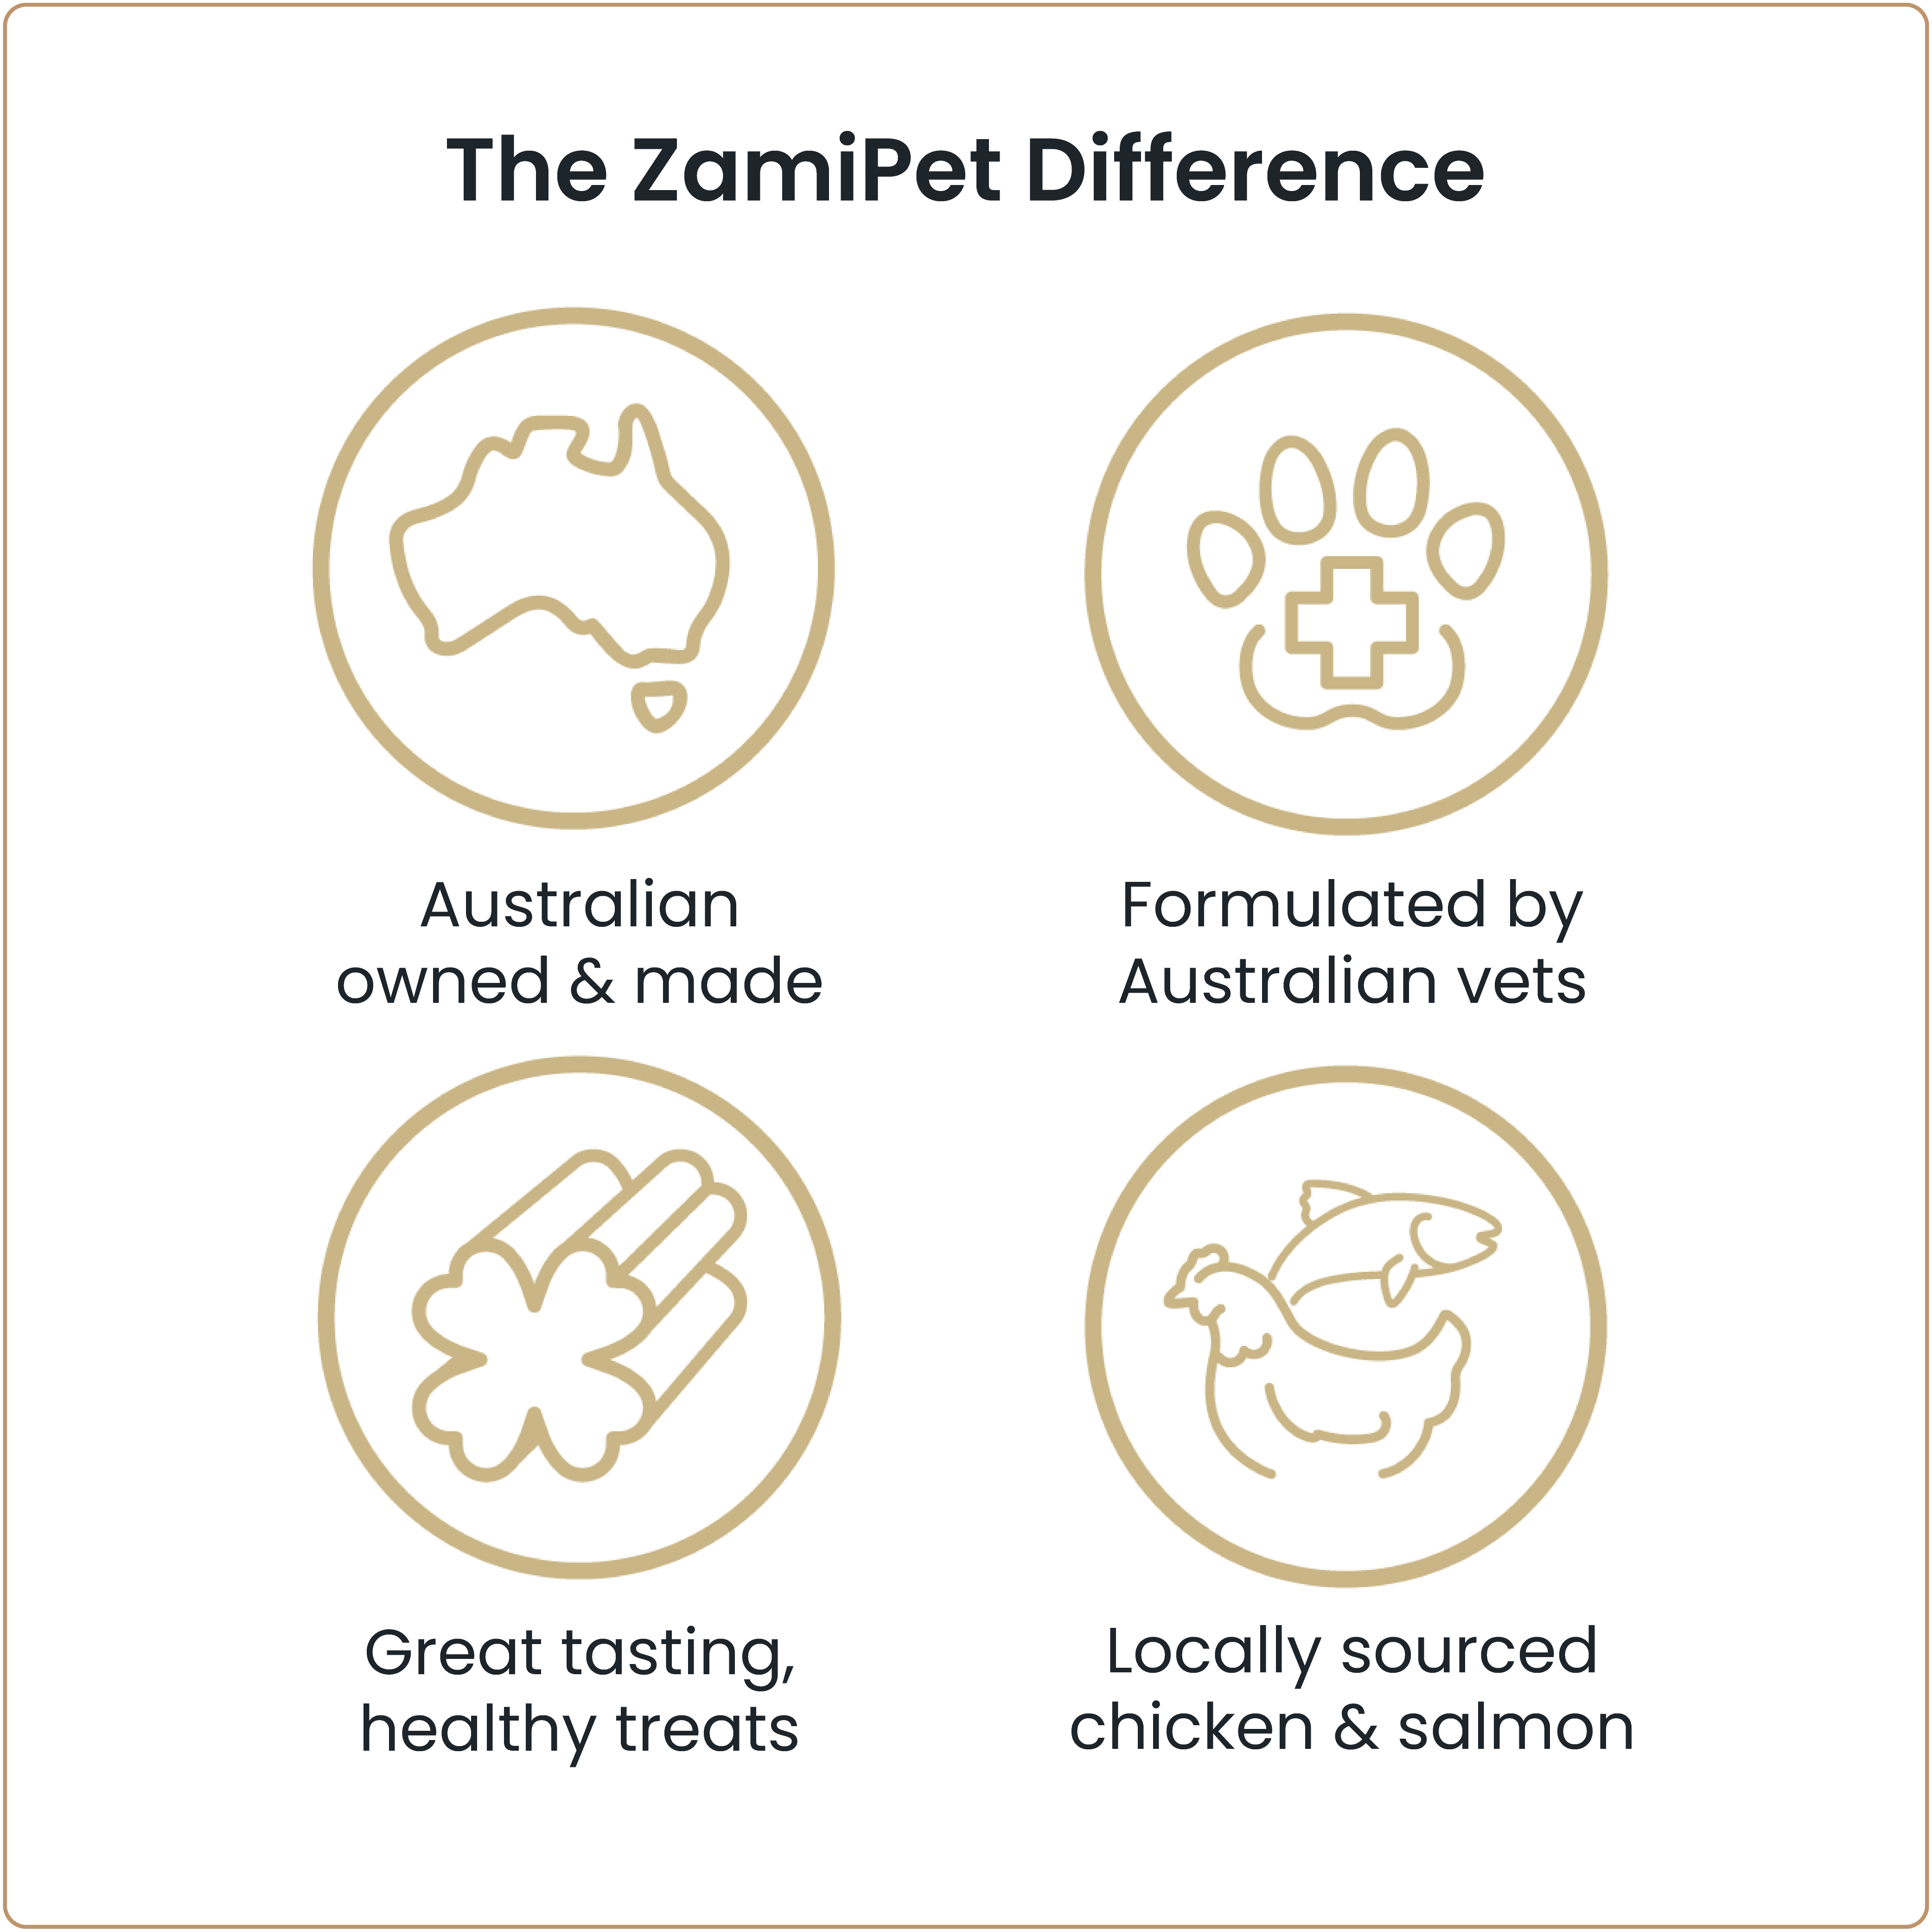 The ZamiPet Difference: Australian made & owned, Formulated by Australian Vets, Great tasting healthy treats, made with locally sourced chicken and salmon. 